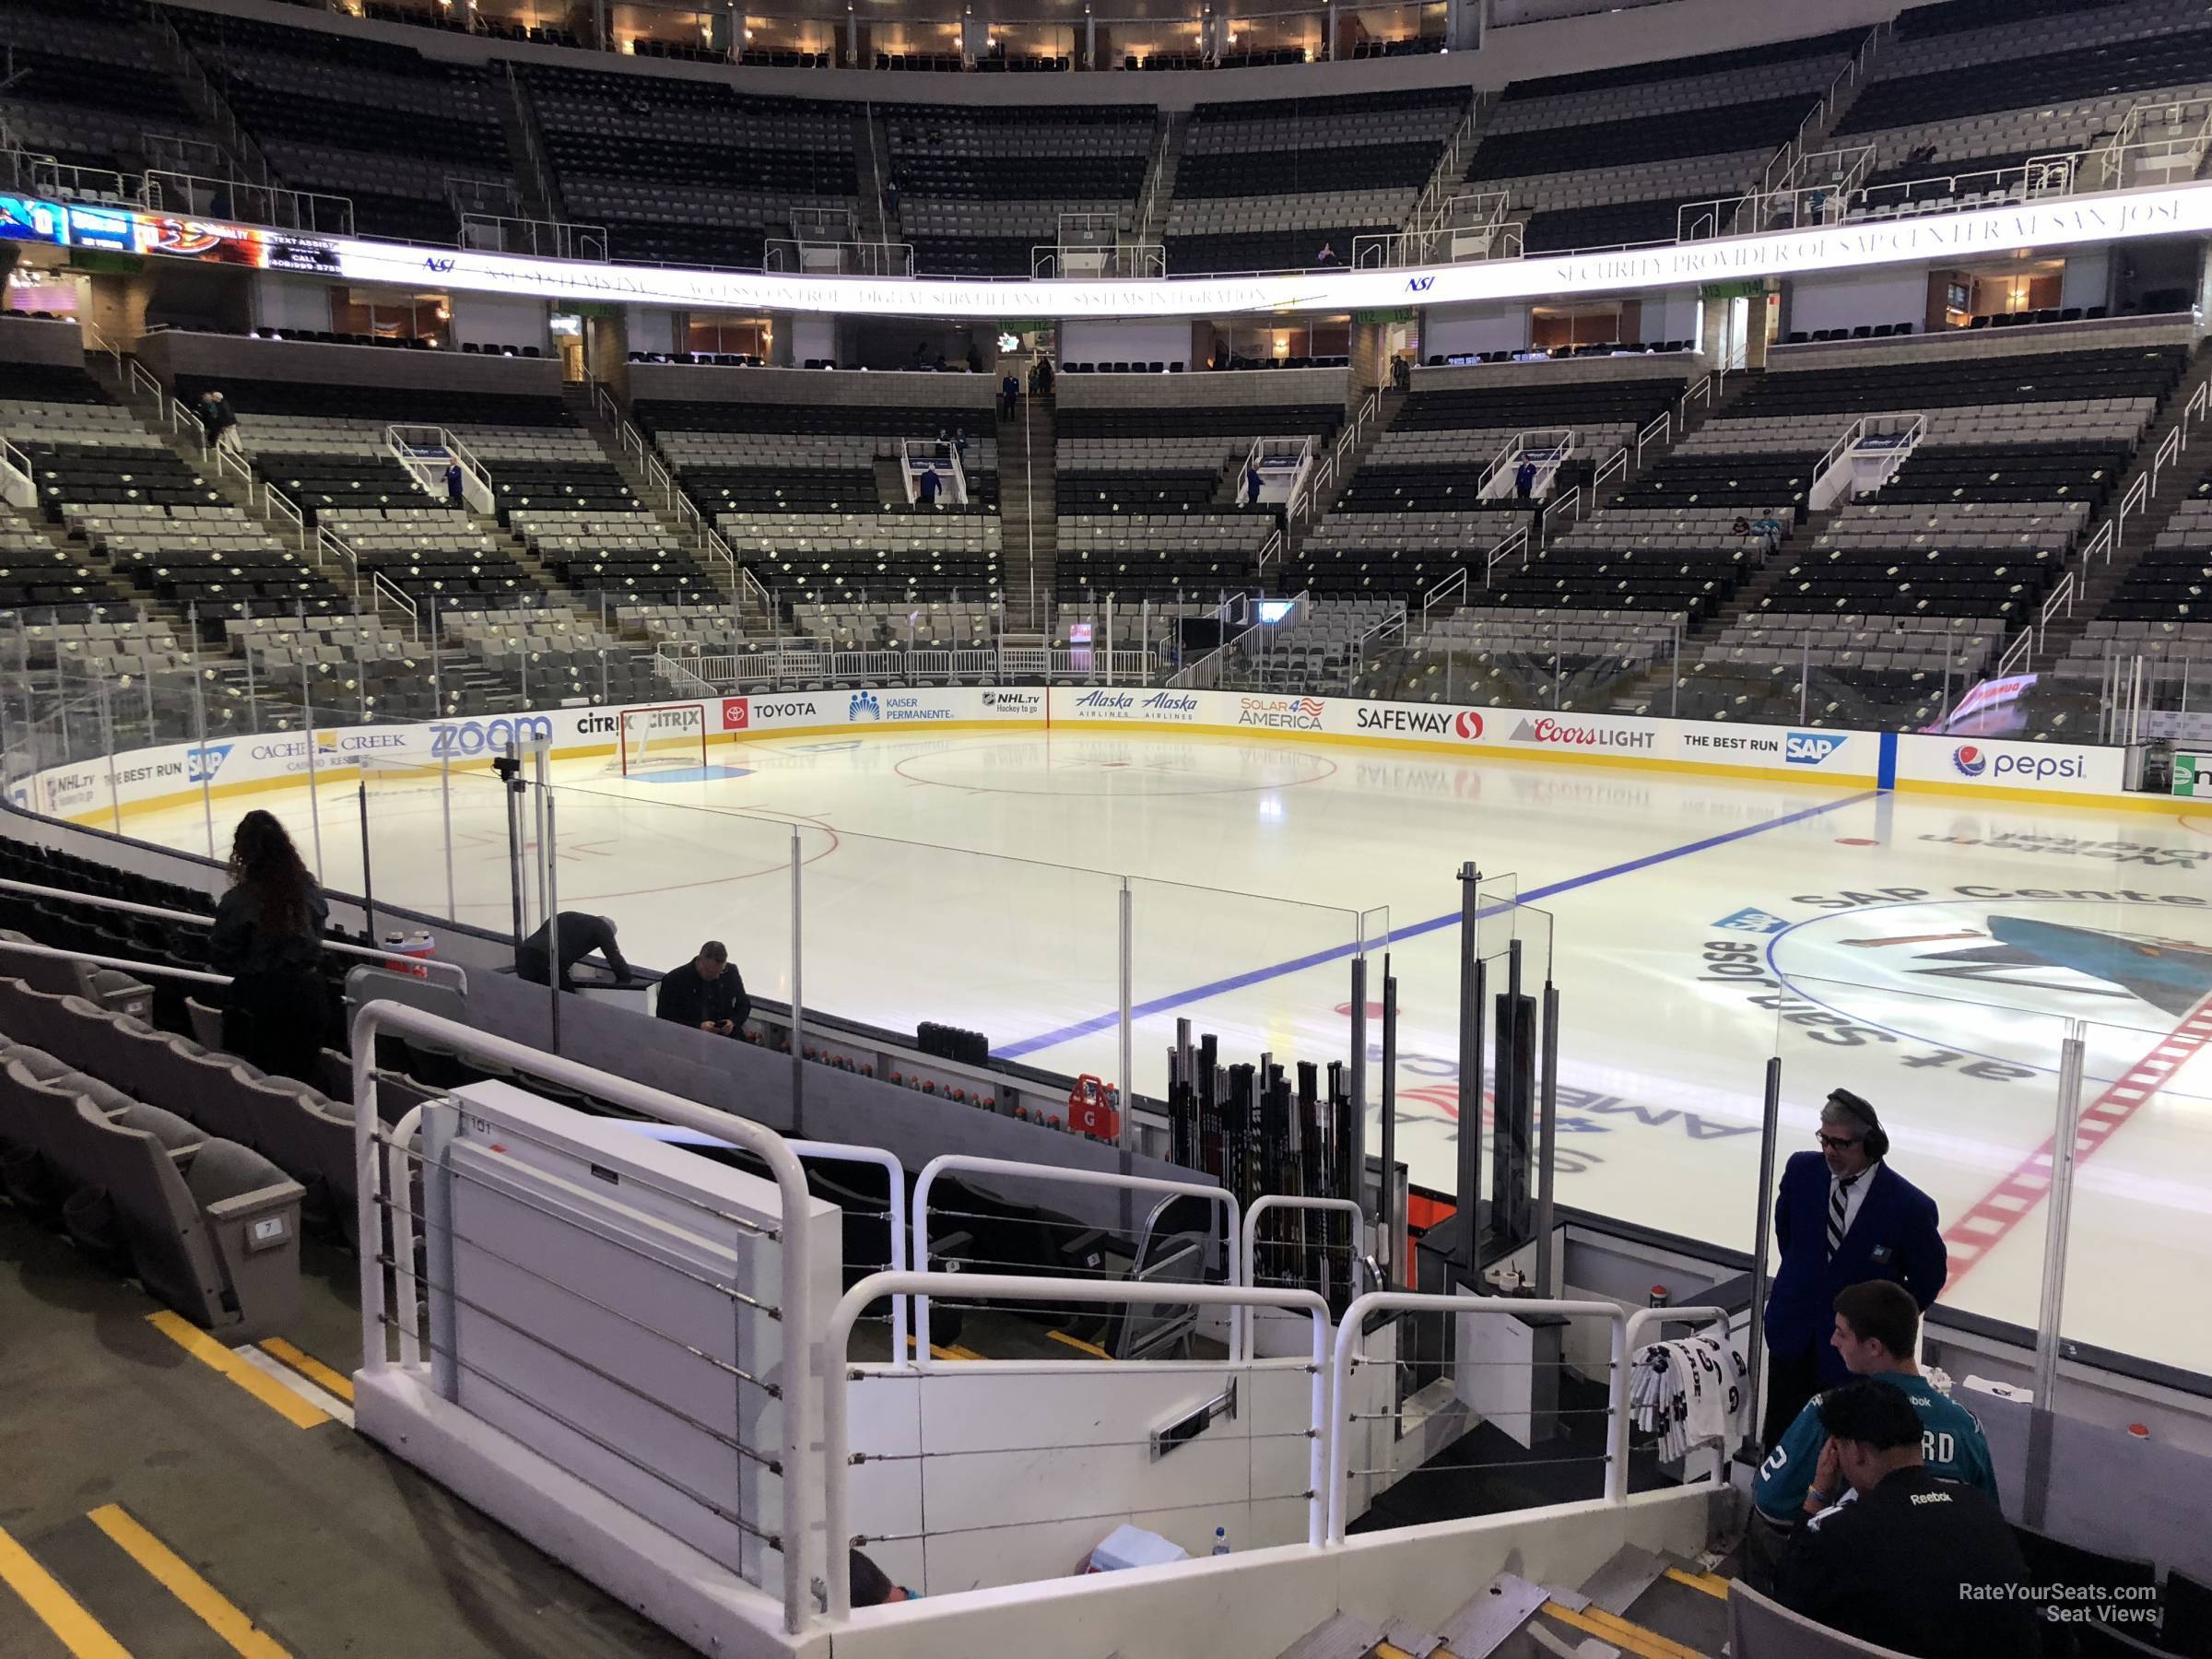 section 128, row 10 seat view  for hockey - sap center